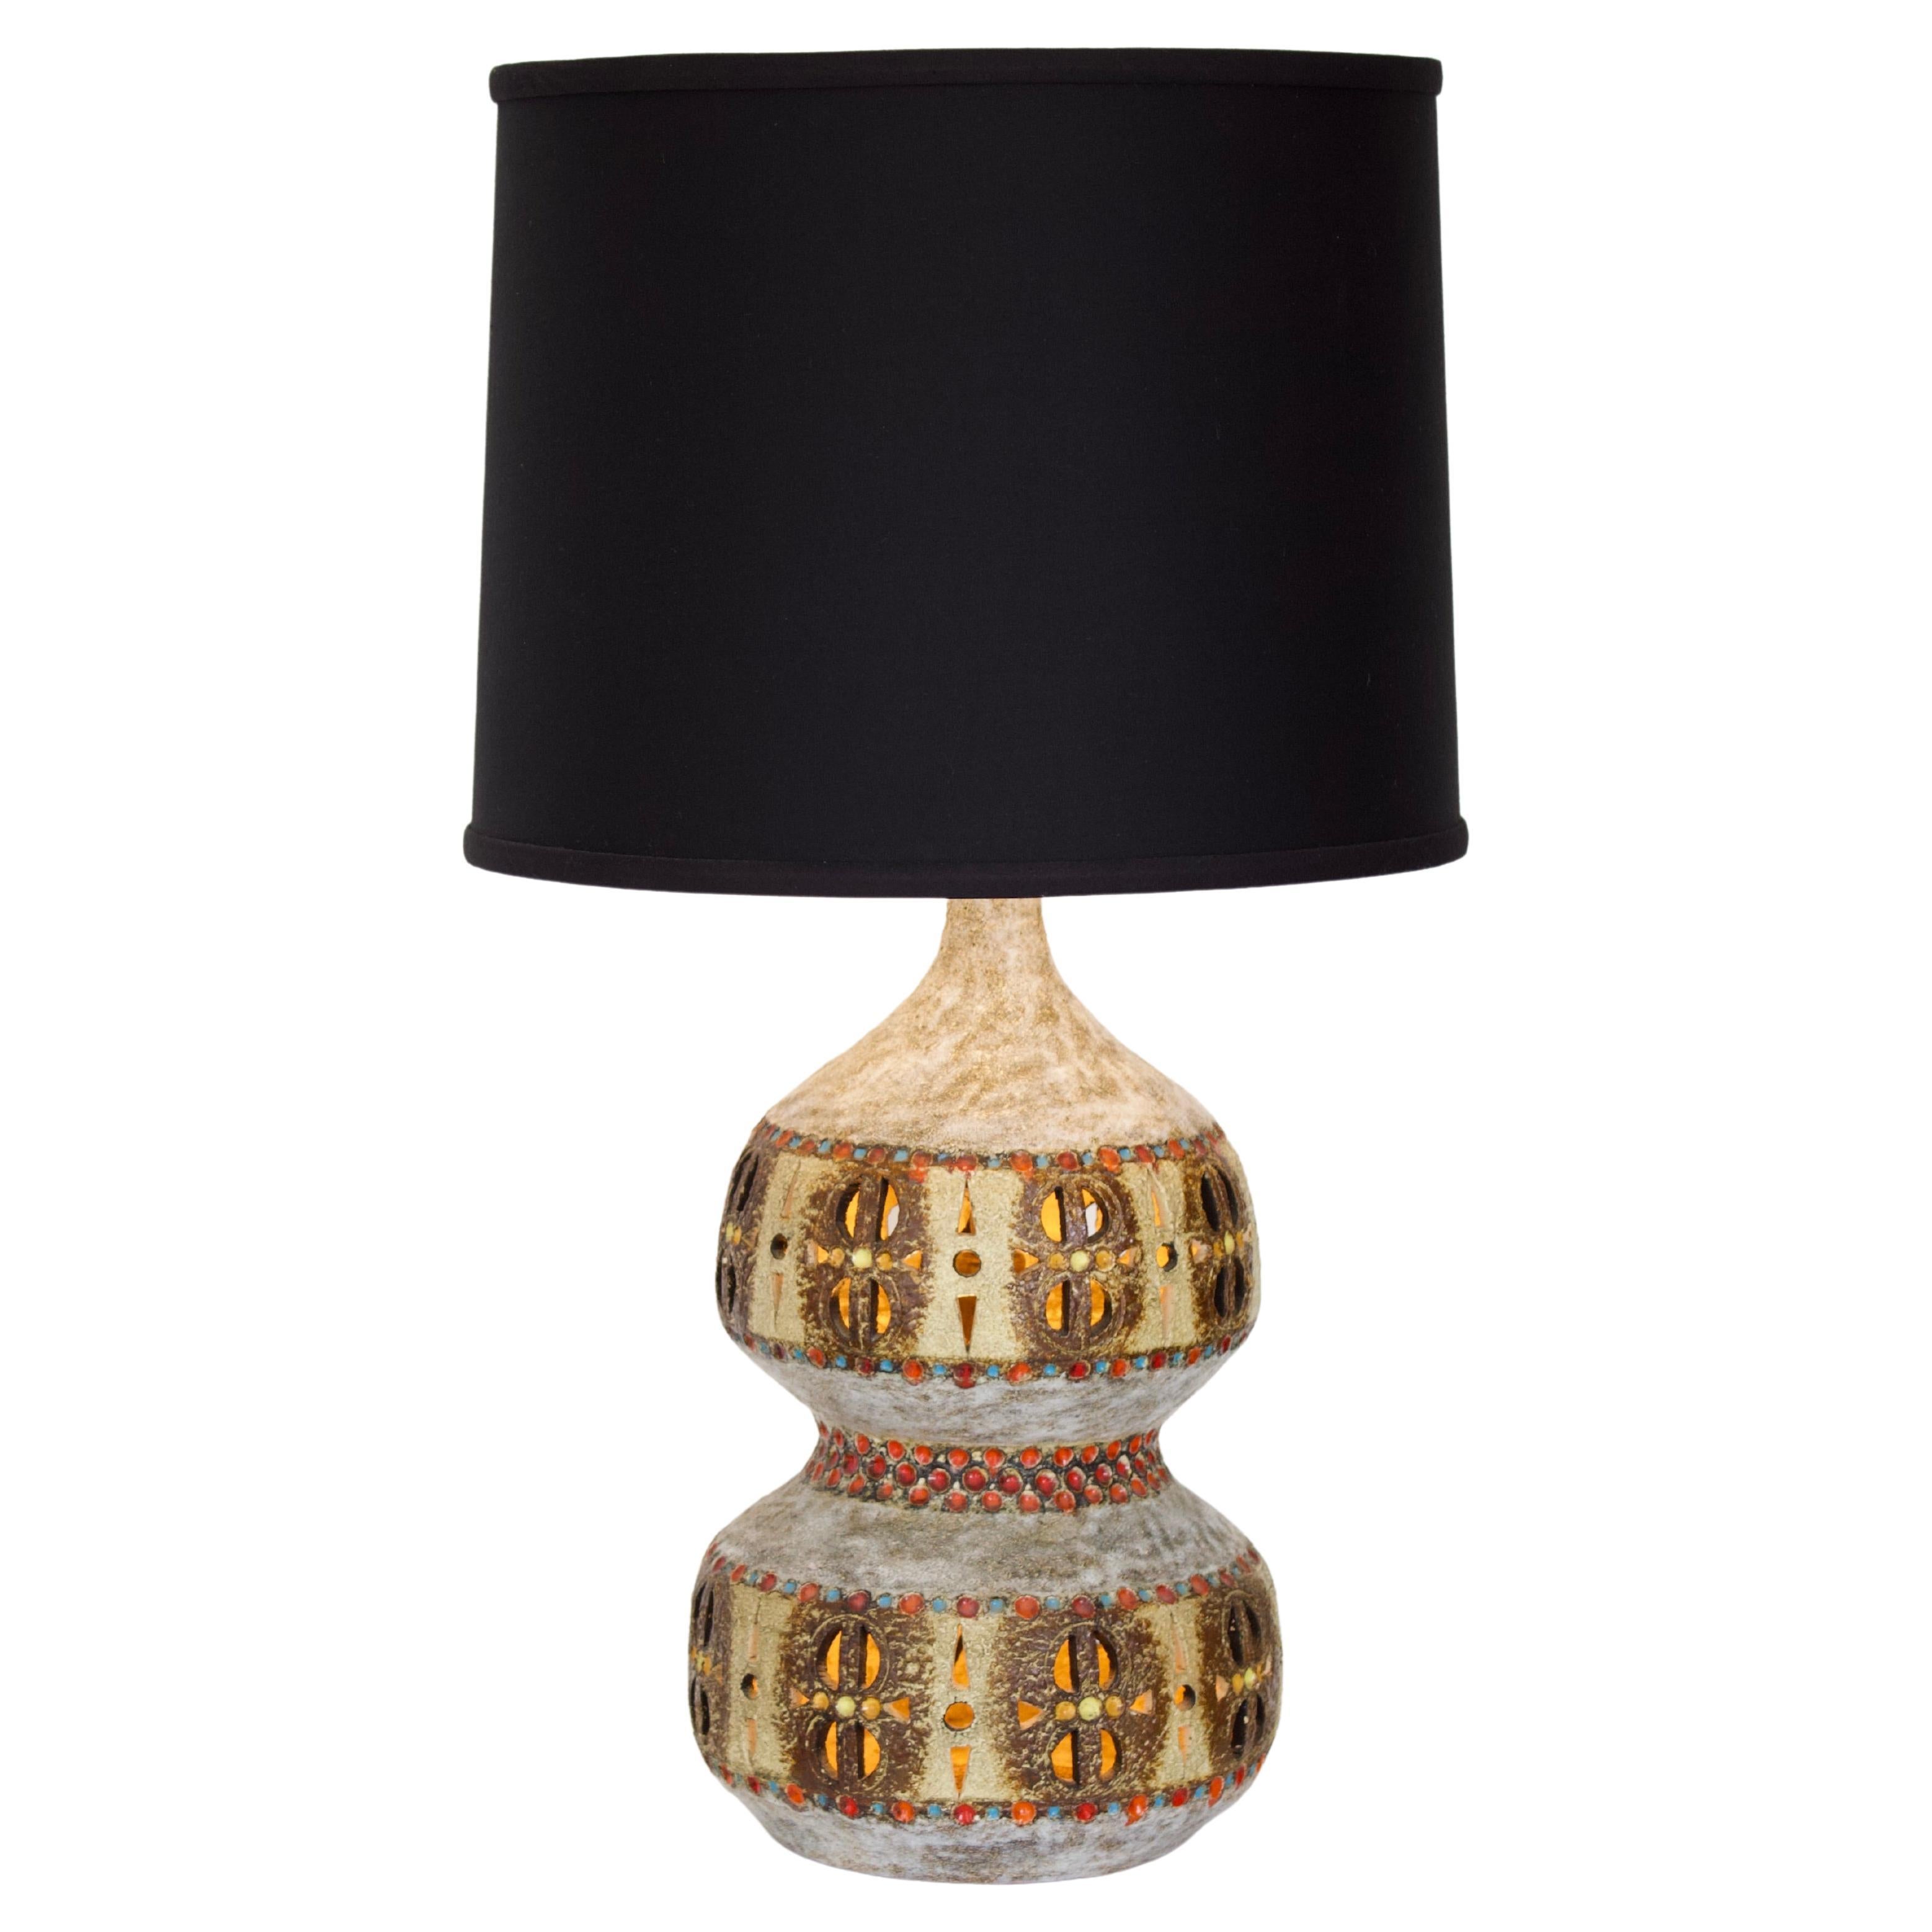 Raphaël Giarrusso French Pierced and Glazed Ceramic Table Lamp